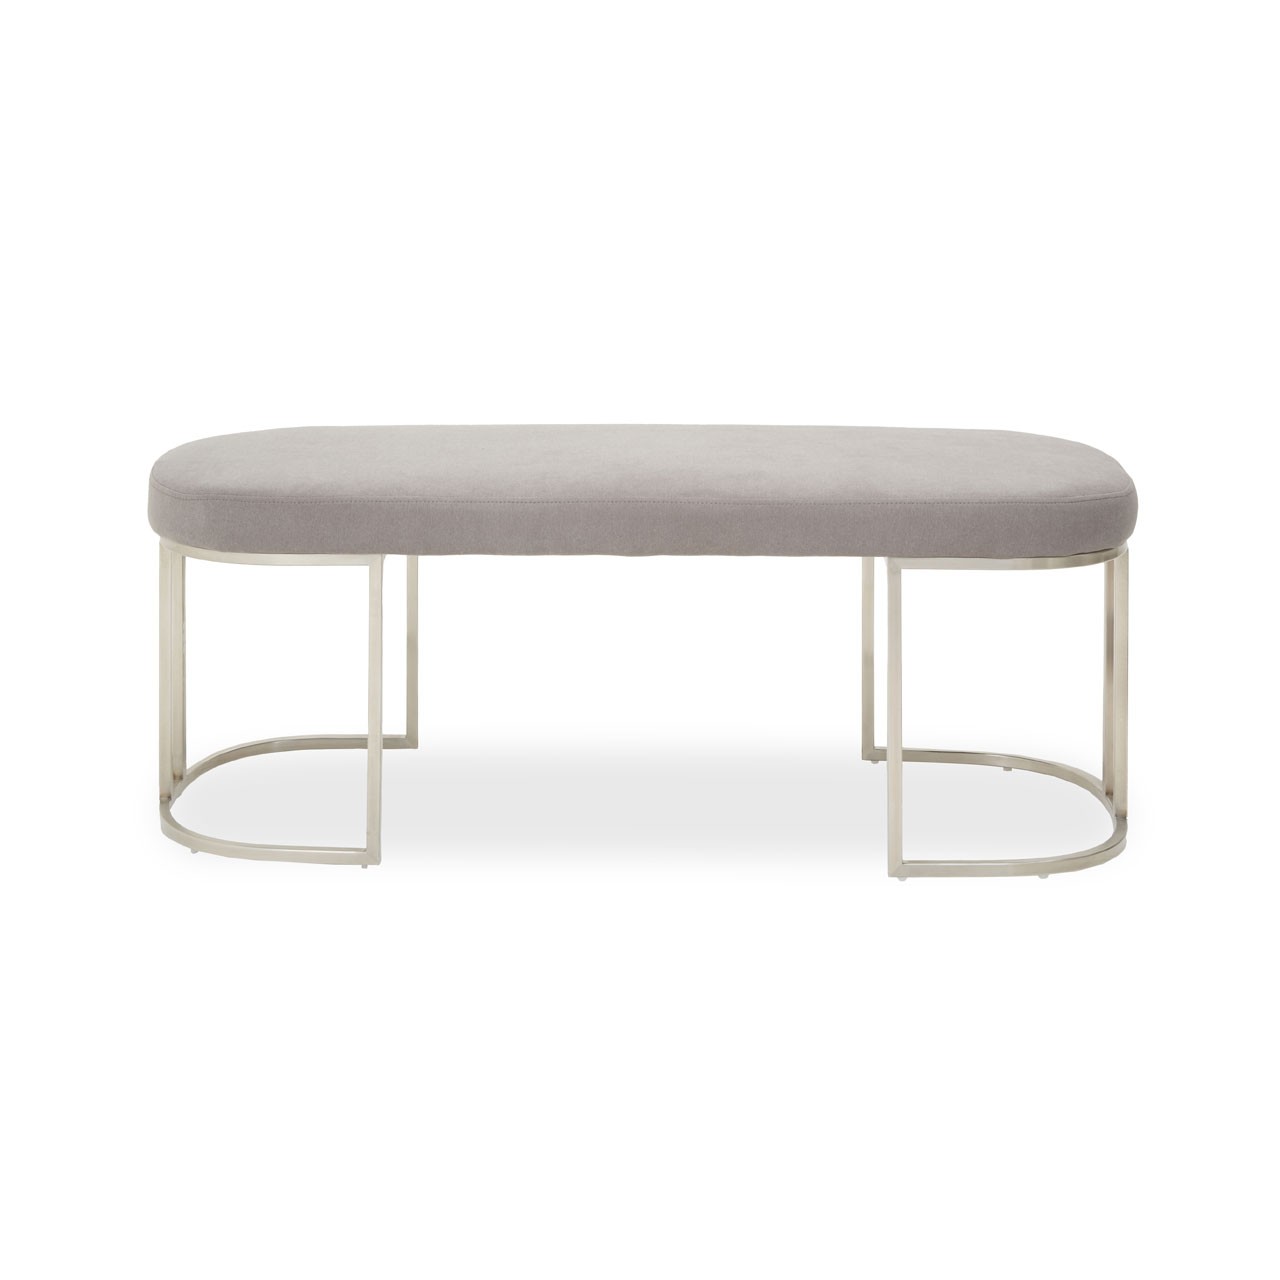 Gilberta Grey Curved Upholstered Bench